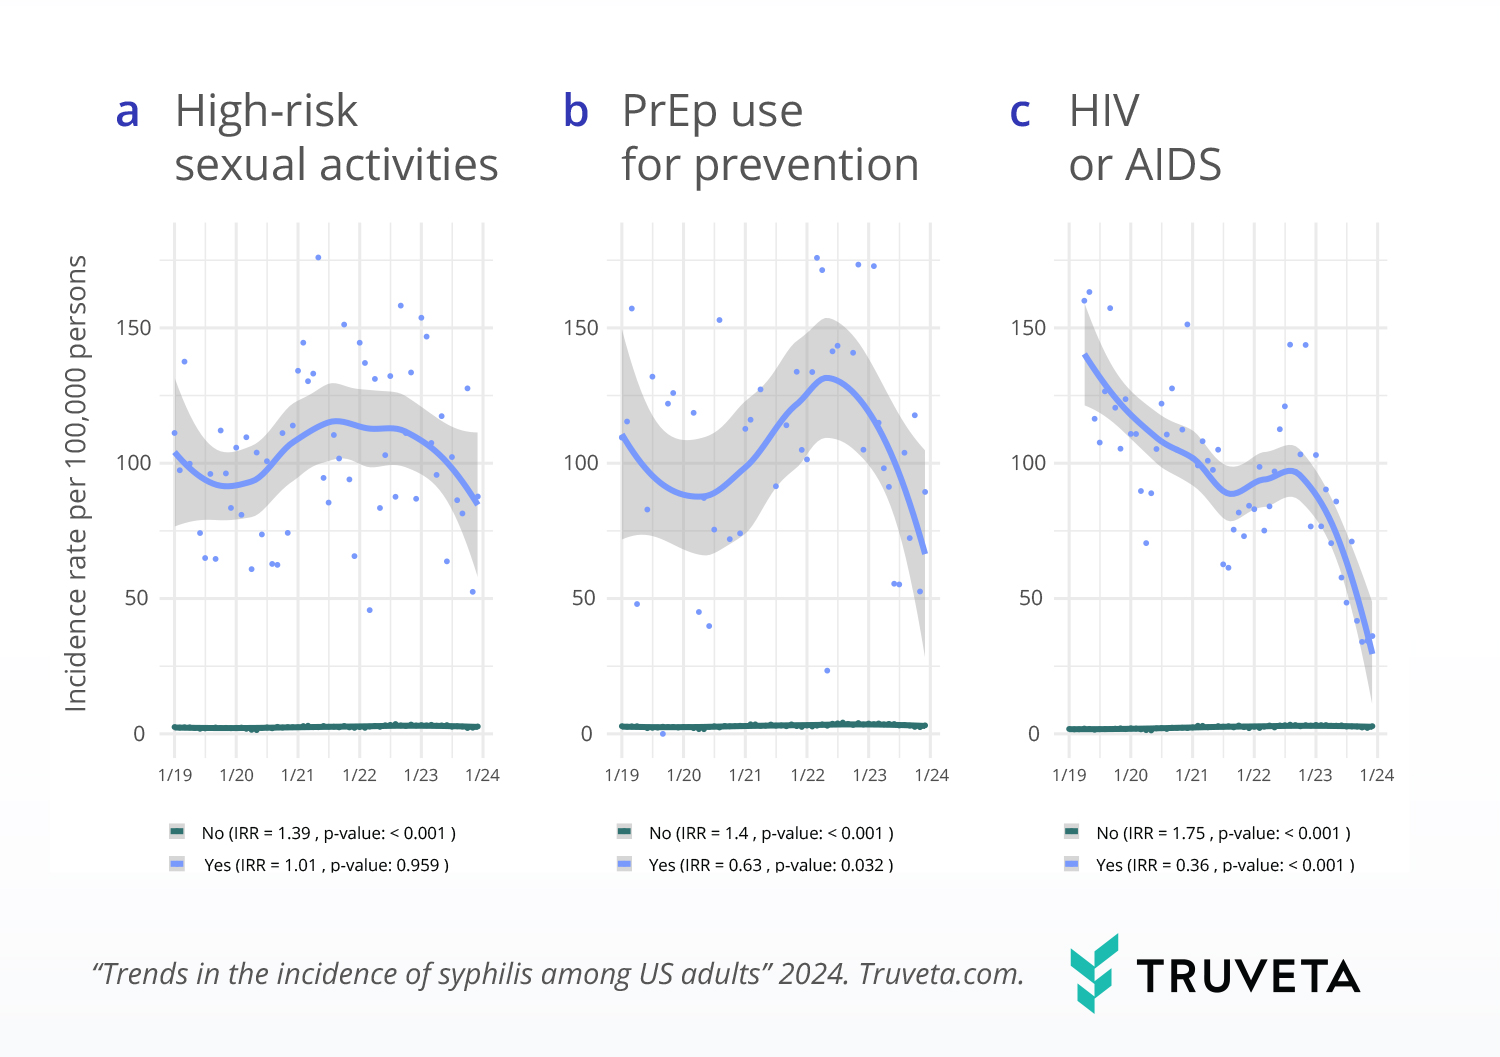 Using timely, de-identified EHR data, Truveta Research explored the monthly trends in the incidence of syphilis among US adults from January 2019 to December 2023.